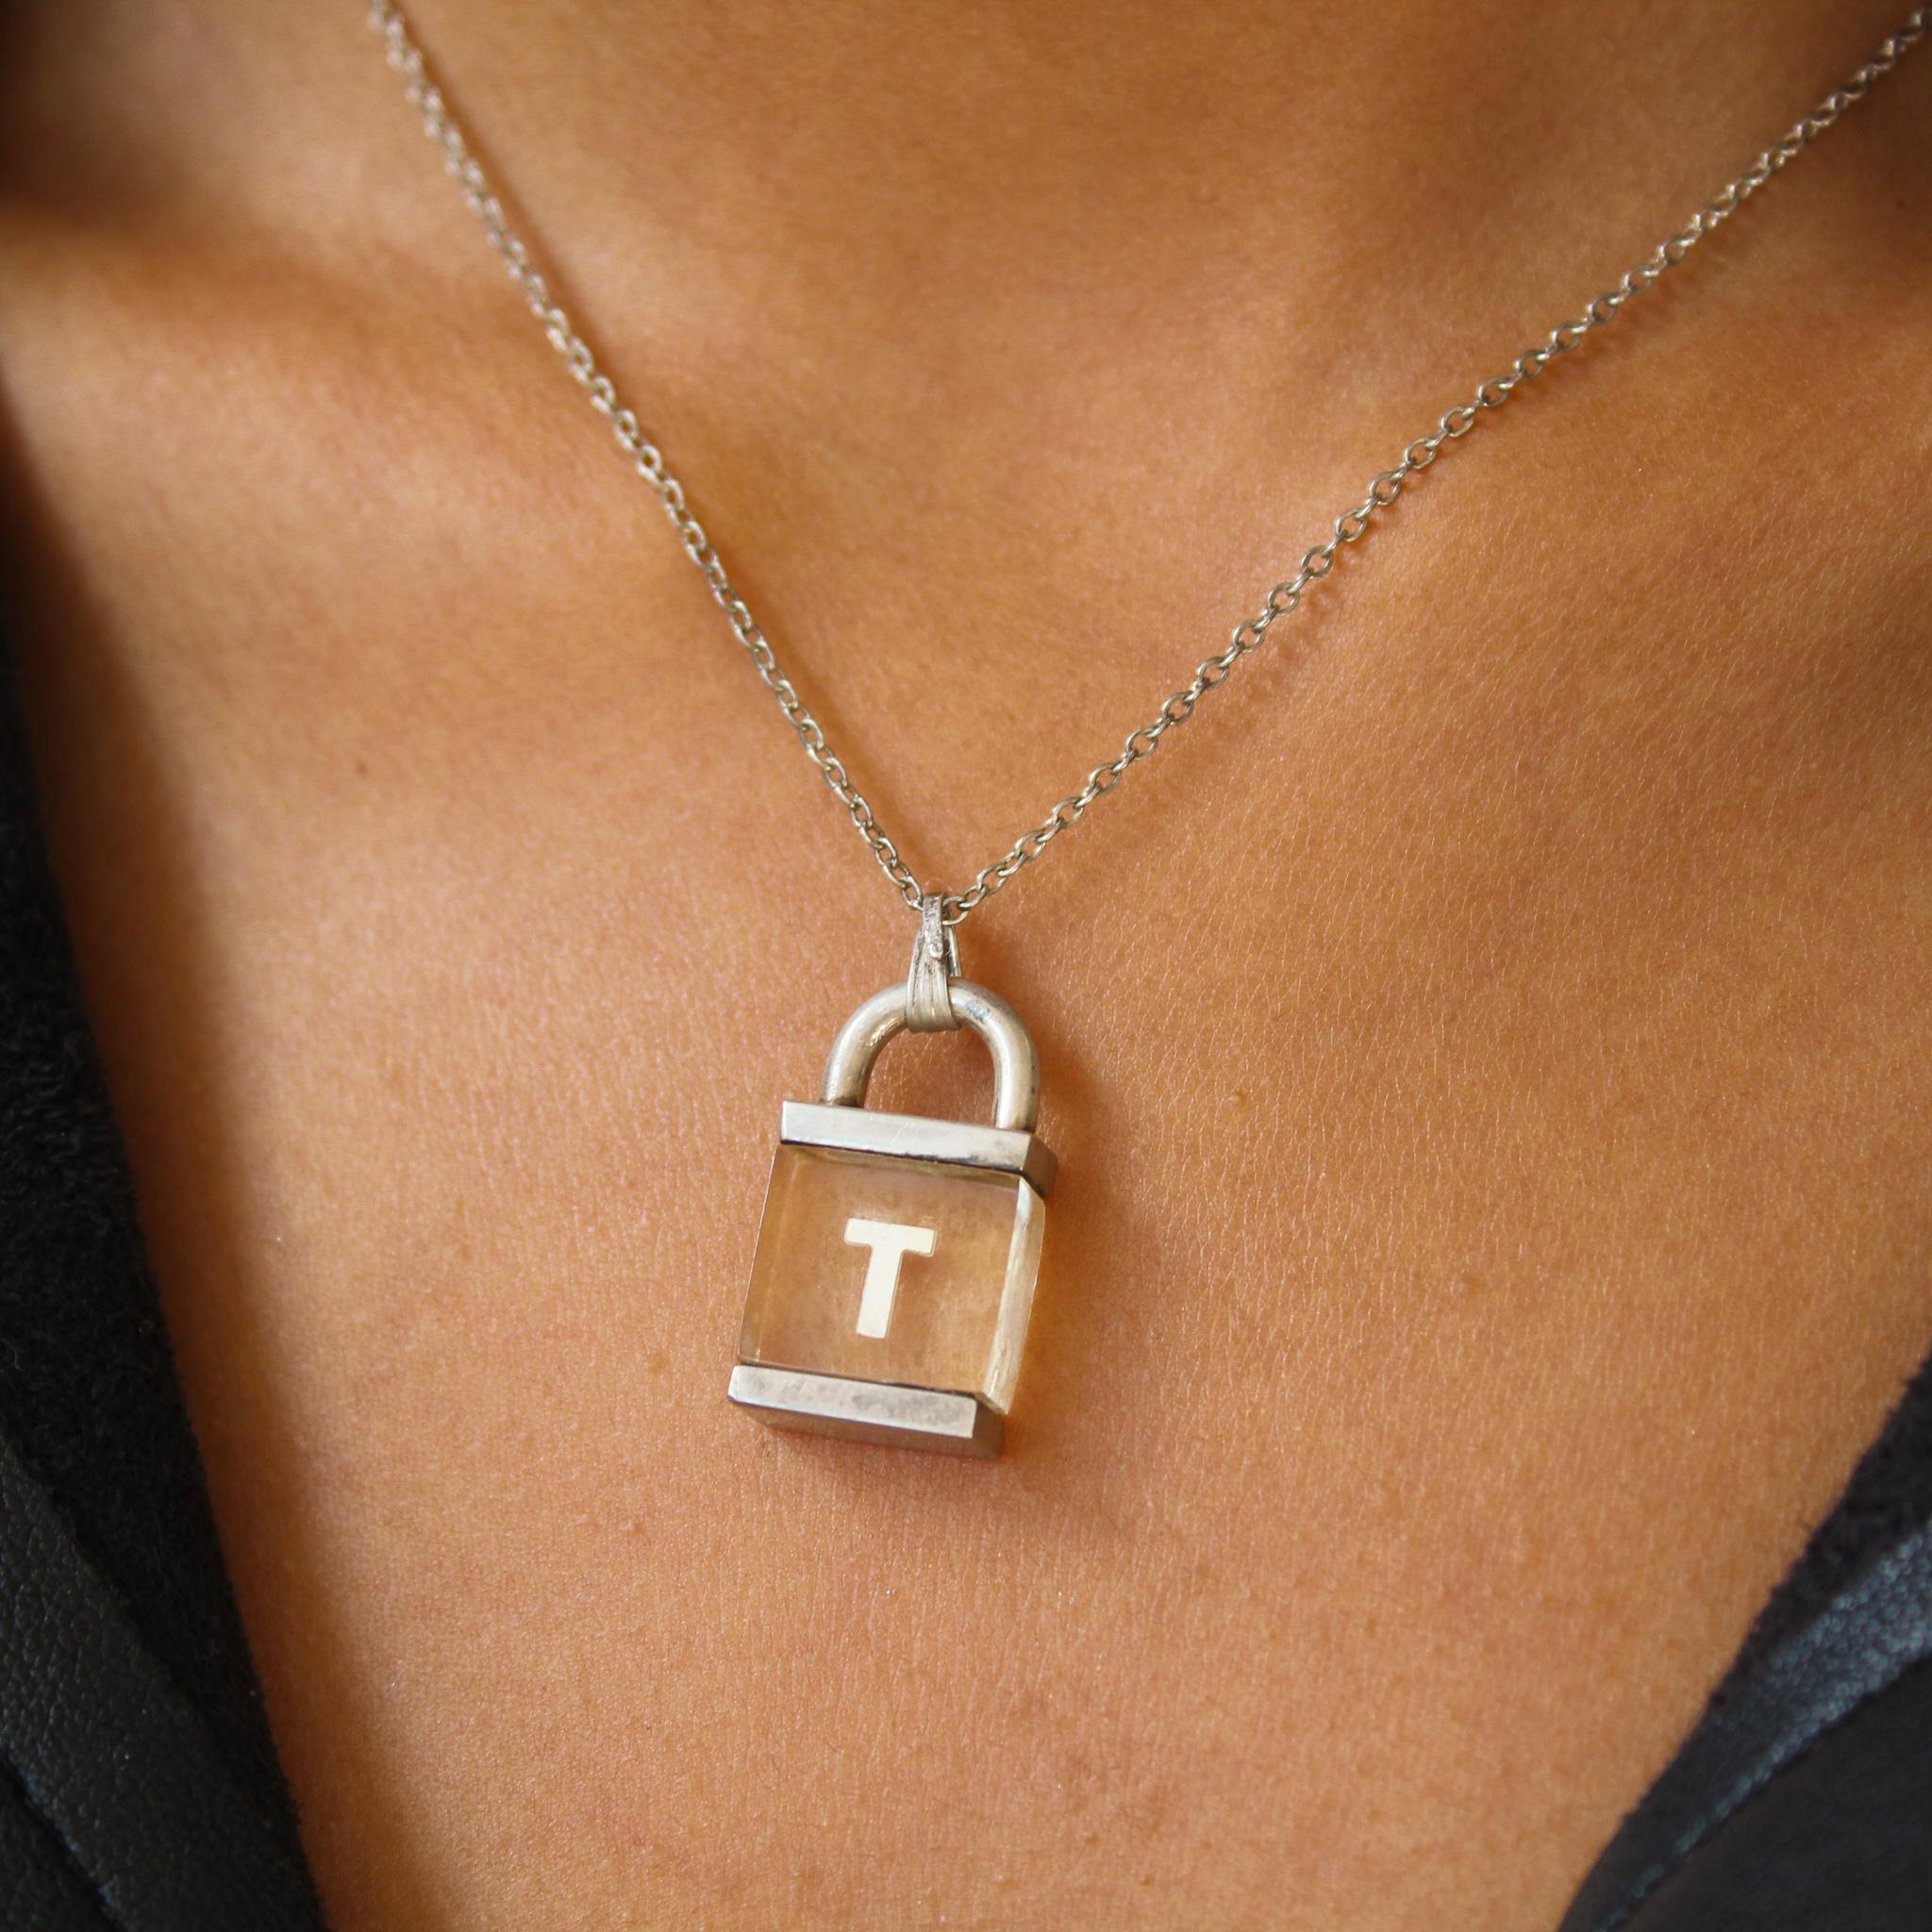 Vintage Trifari 1950s Necklace

A super cool and rare sterling silver padlock pendant from Trifari, one of the world's most famous costume jewellers. Made in the US in the 1950s, this amazing necklace is crafted from real silver, featuring a fine